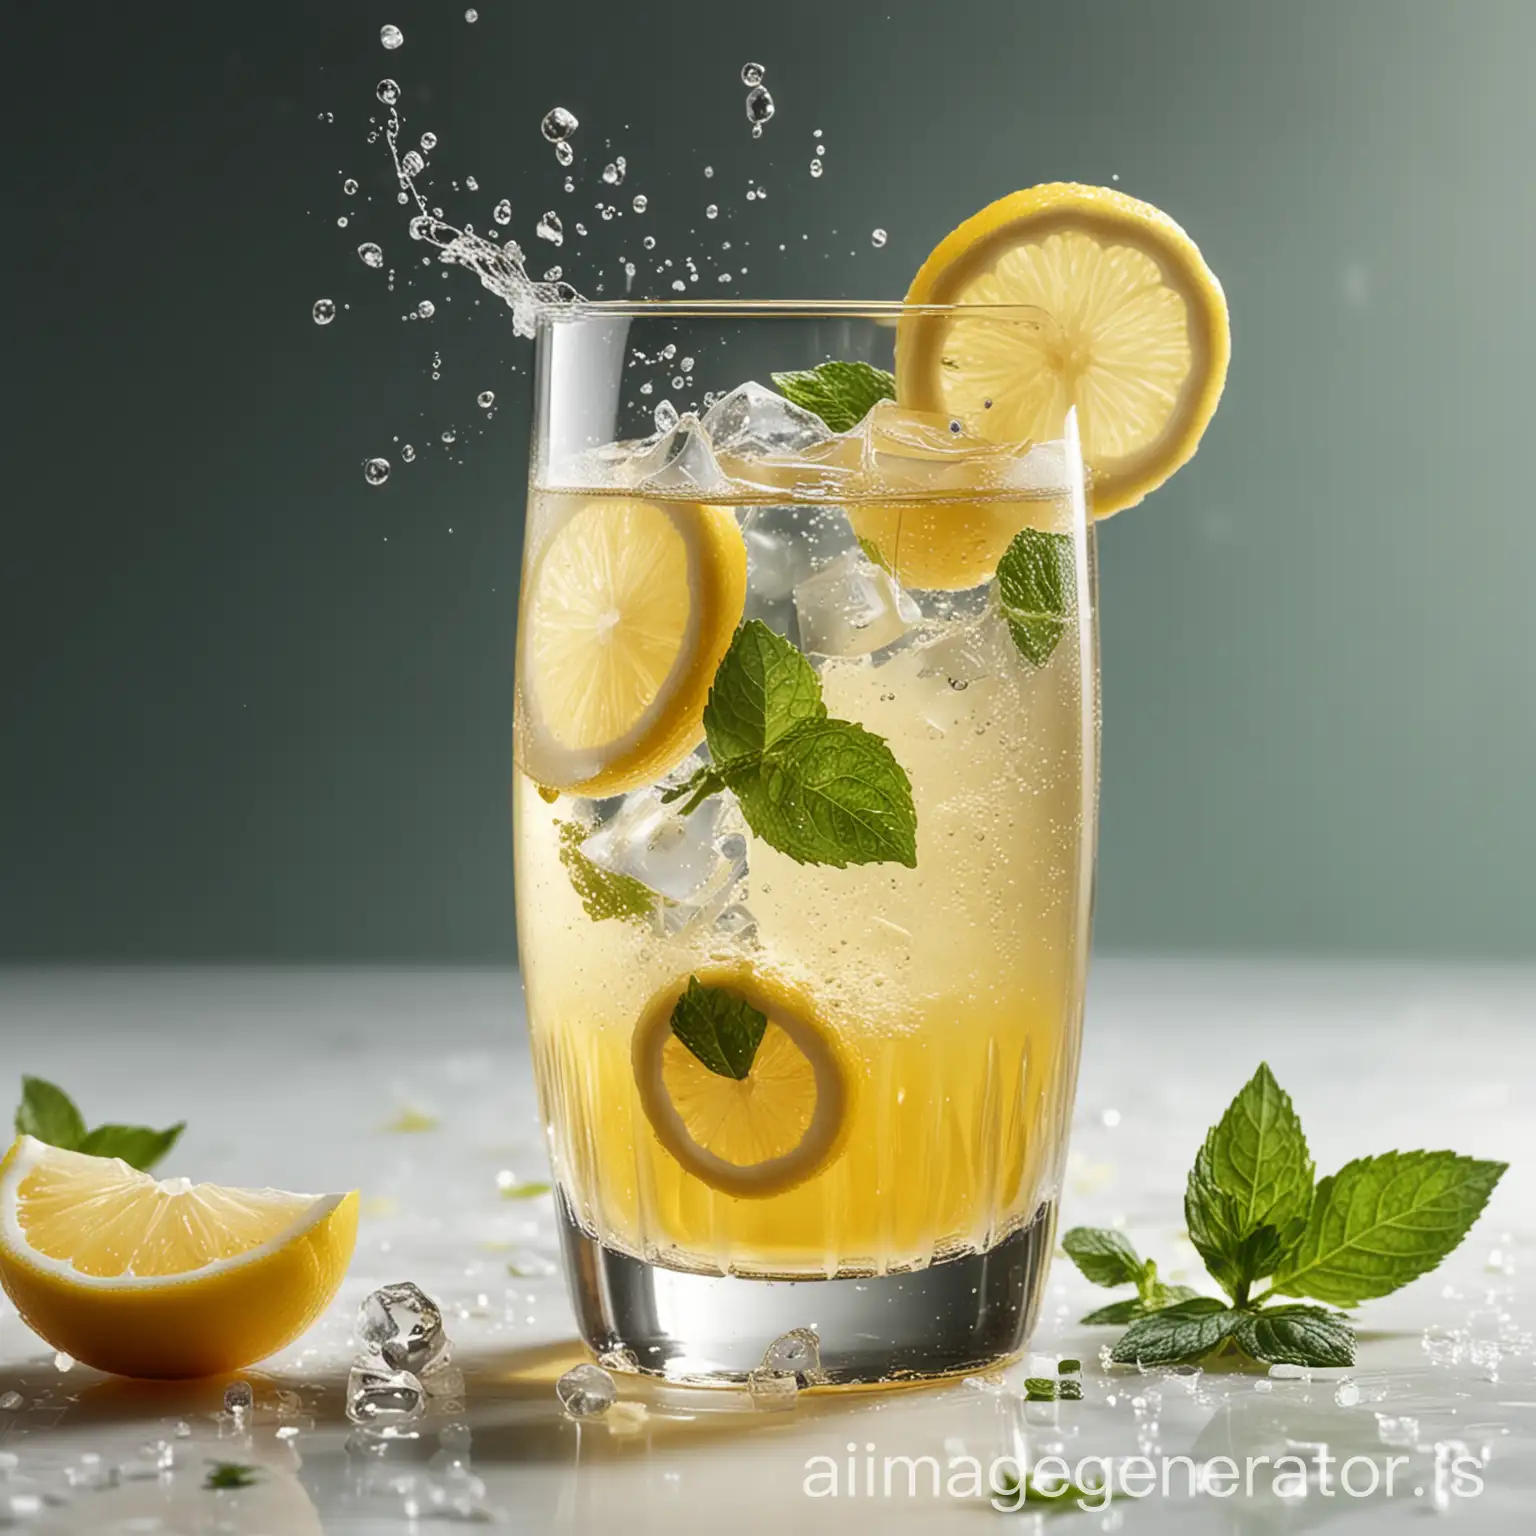 A champagne-like cocktail with lemon, no background, a glass full of bubbly yellow liquid with ice cubes, a few slices of lemon and mint leaves. The liquid inside the glass is swirling, adding to its dynamic feel.